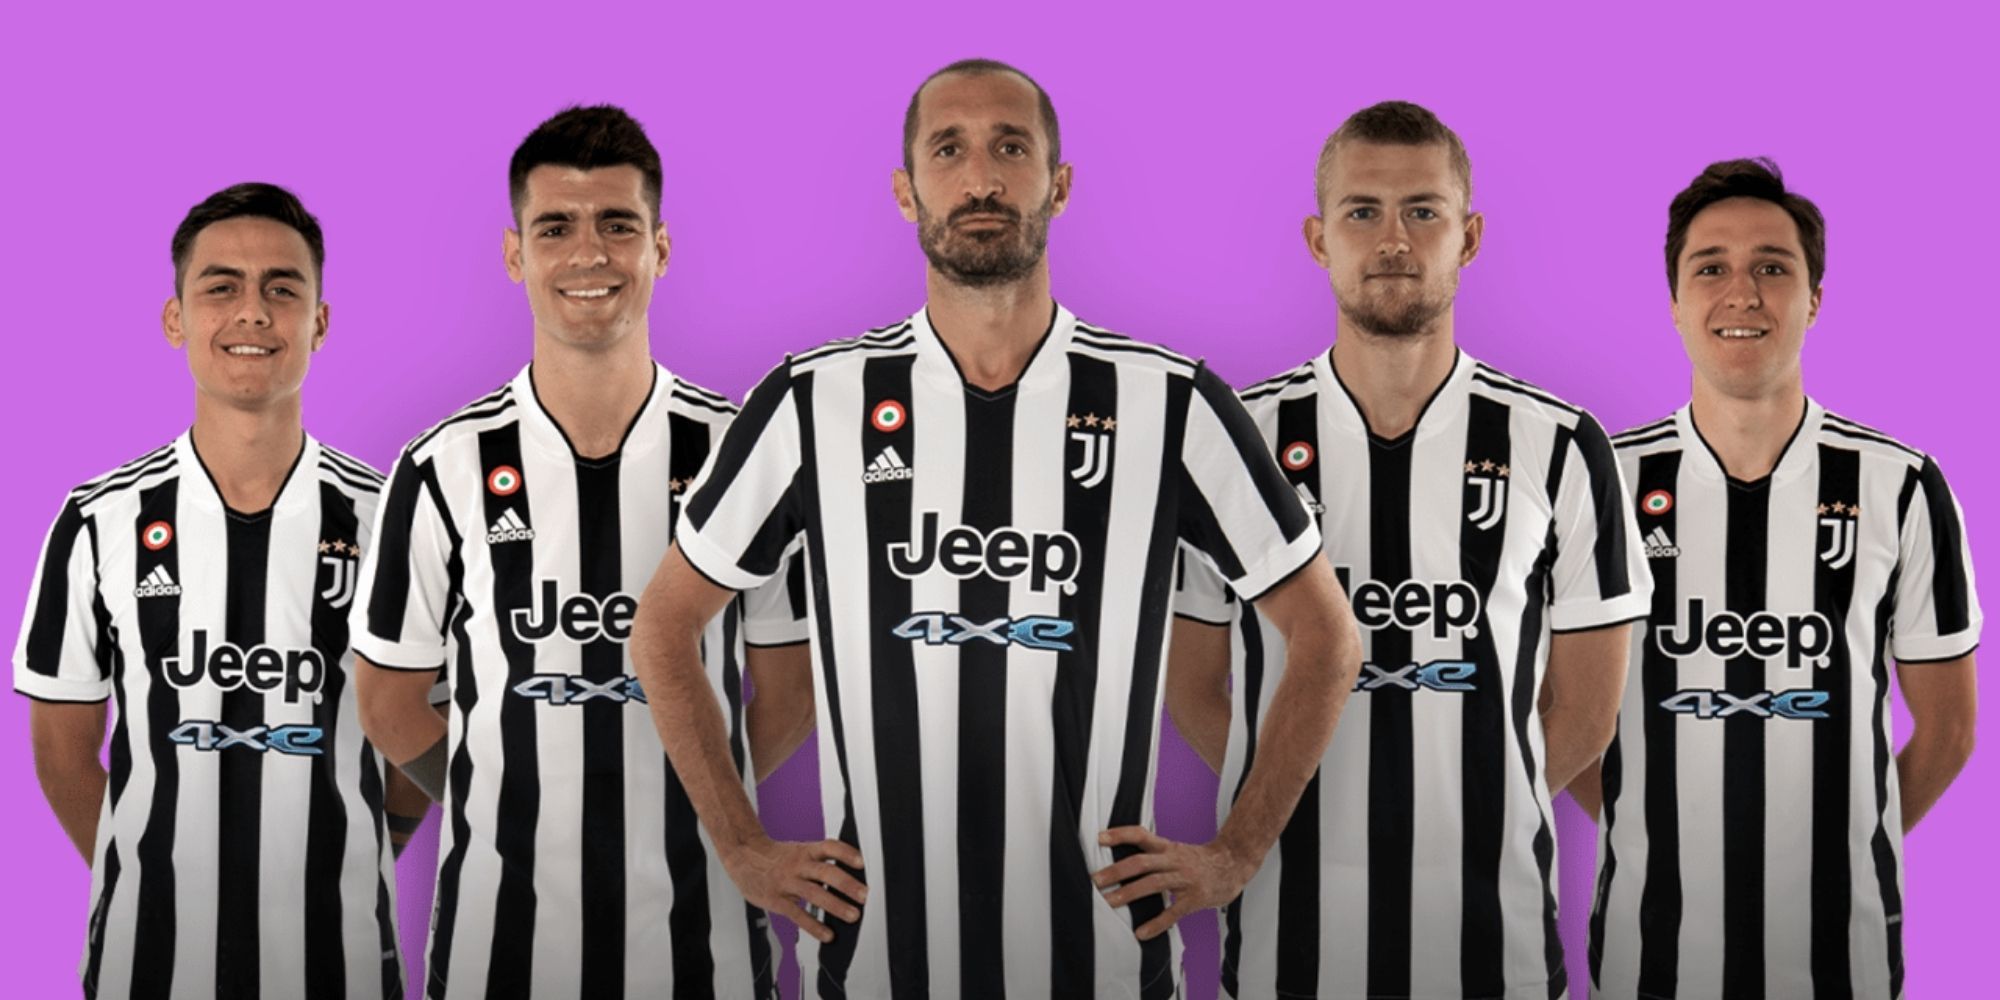 Image of Juventus football team over a purple background.